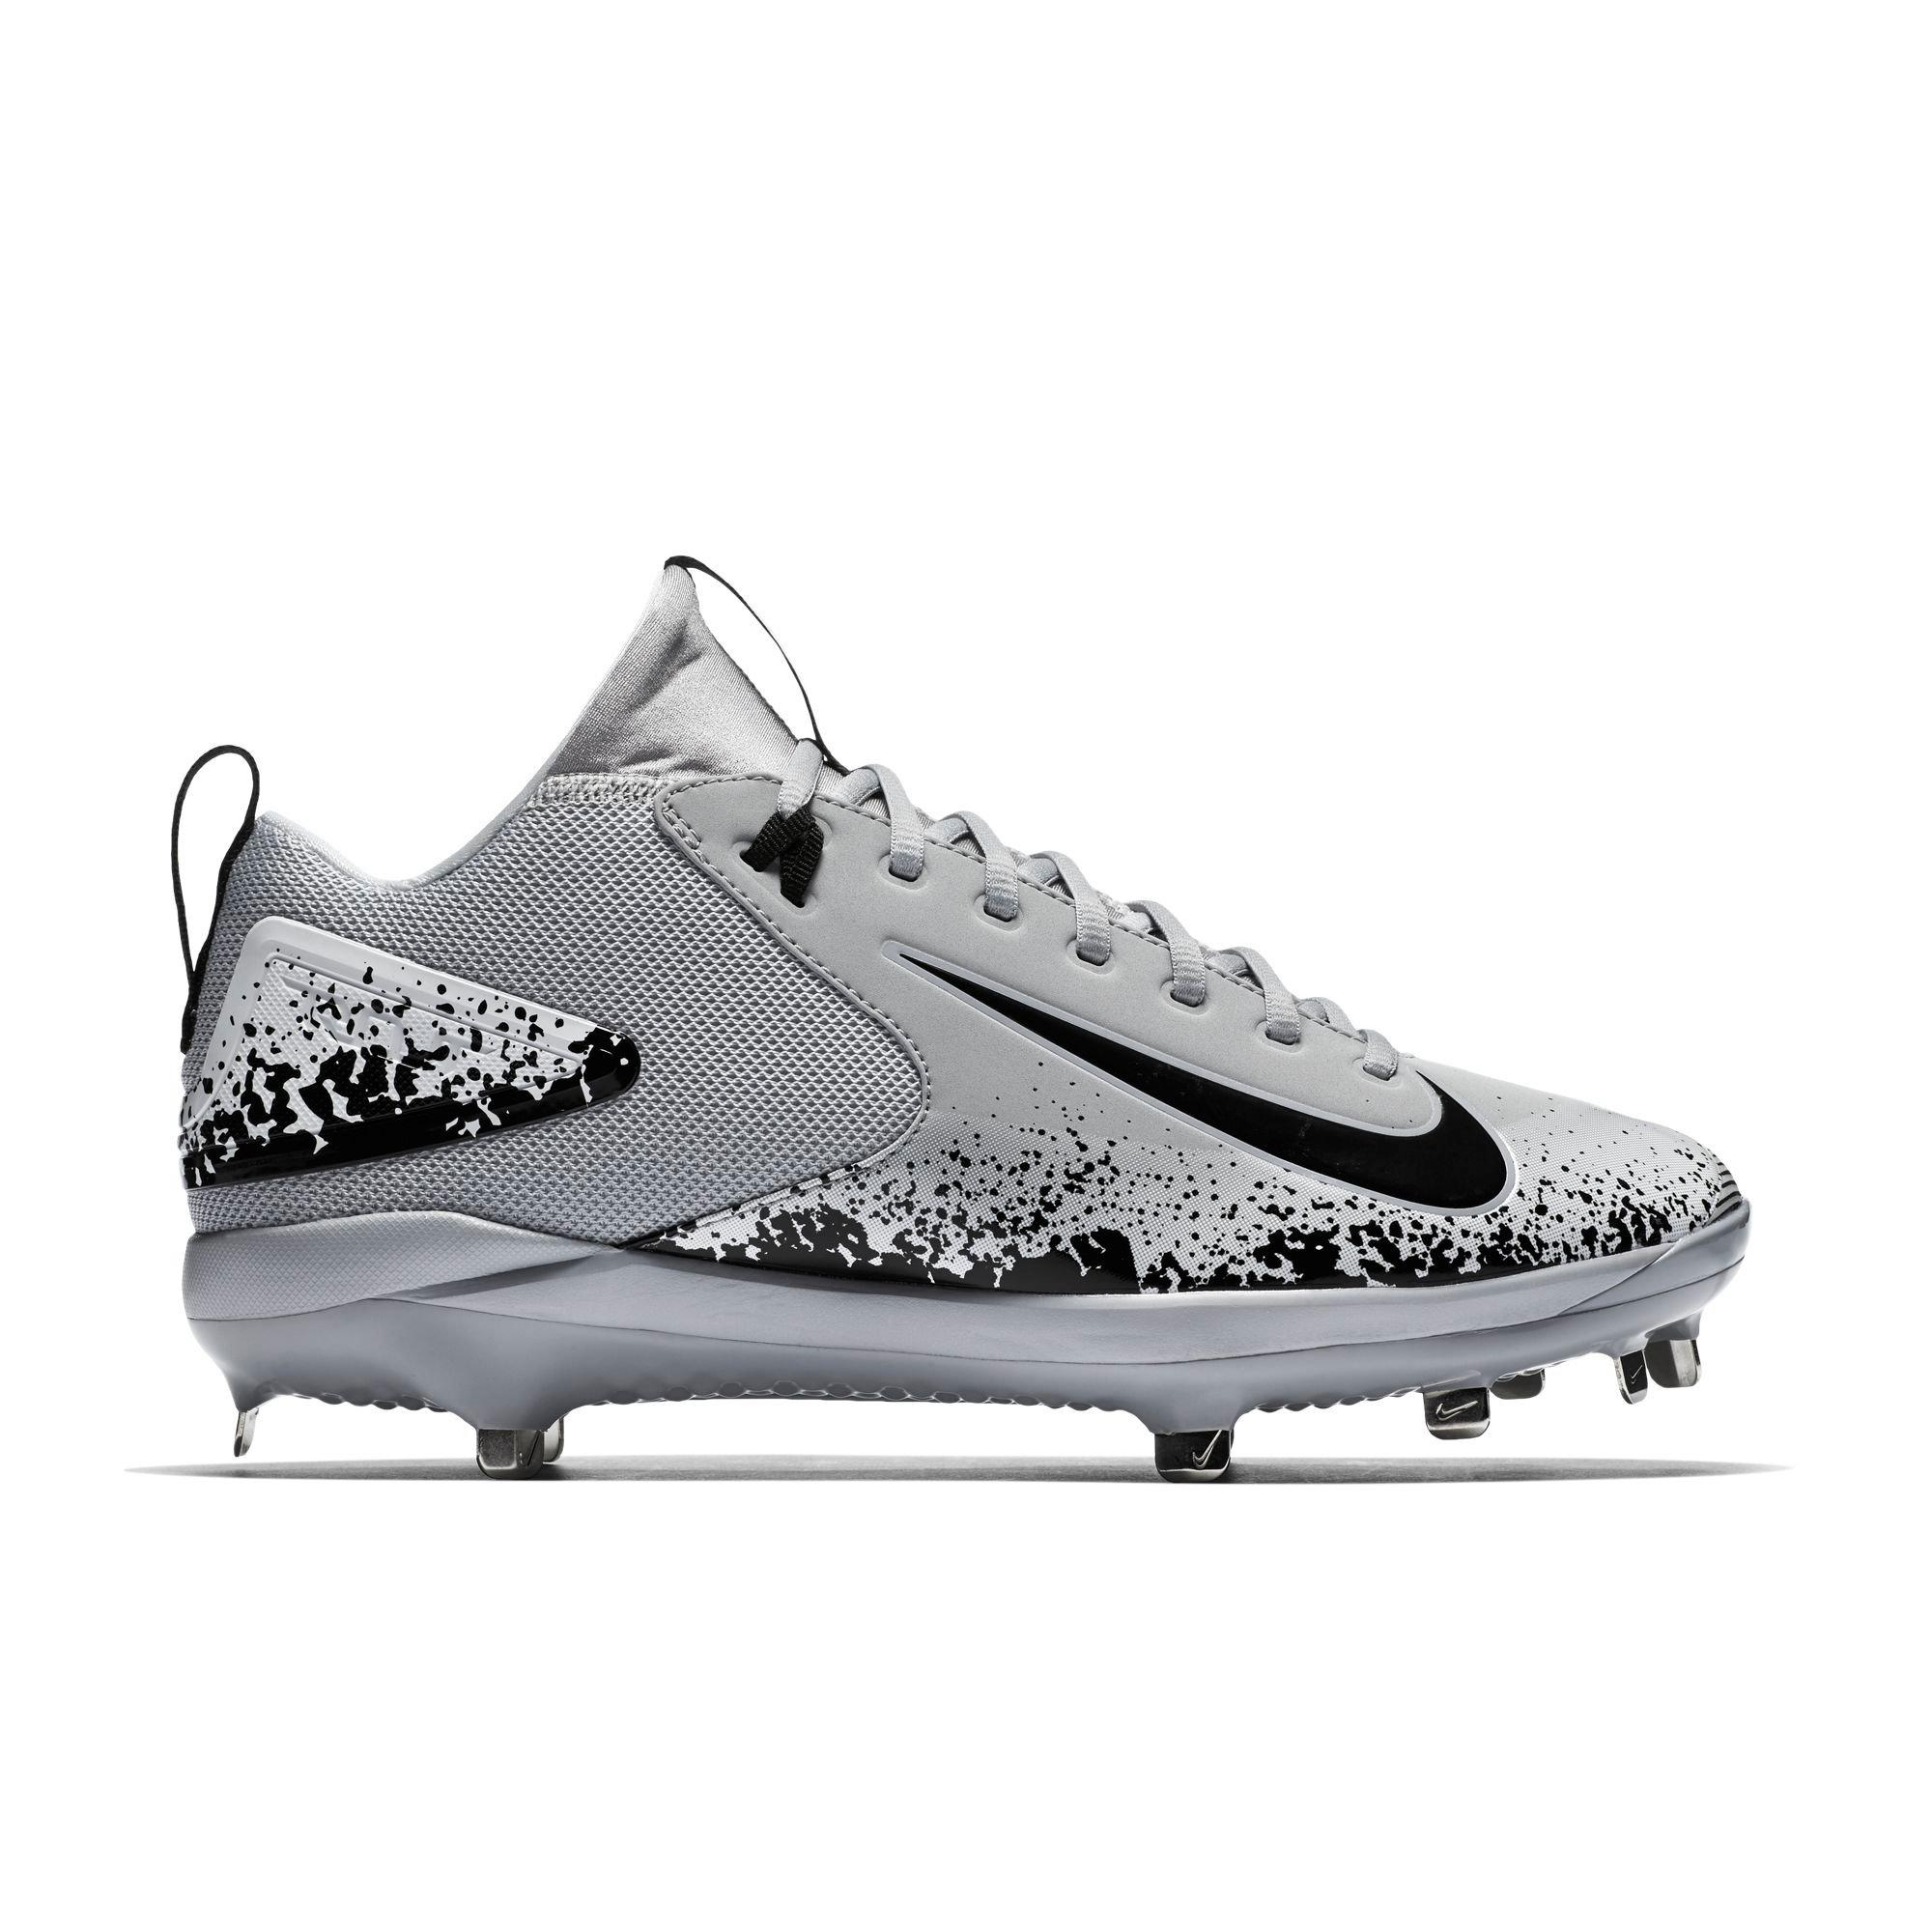 nike trout 3 cleats